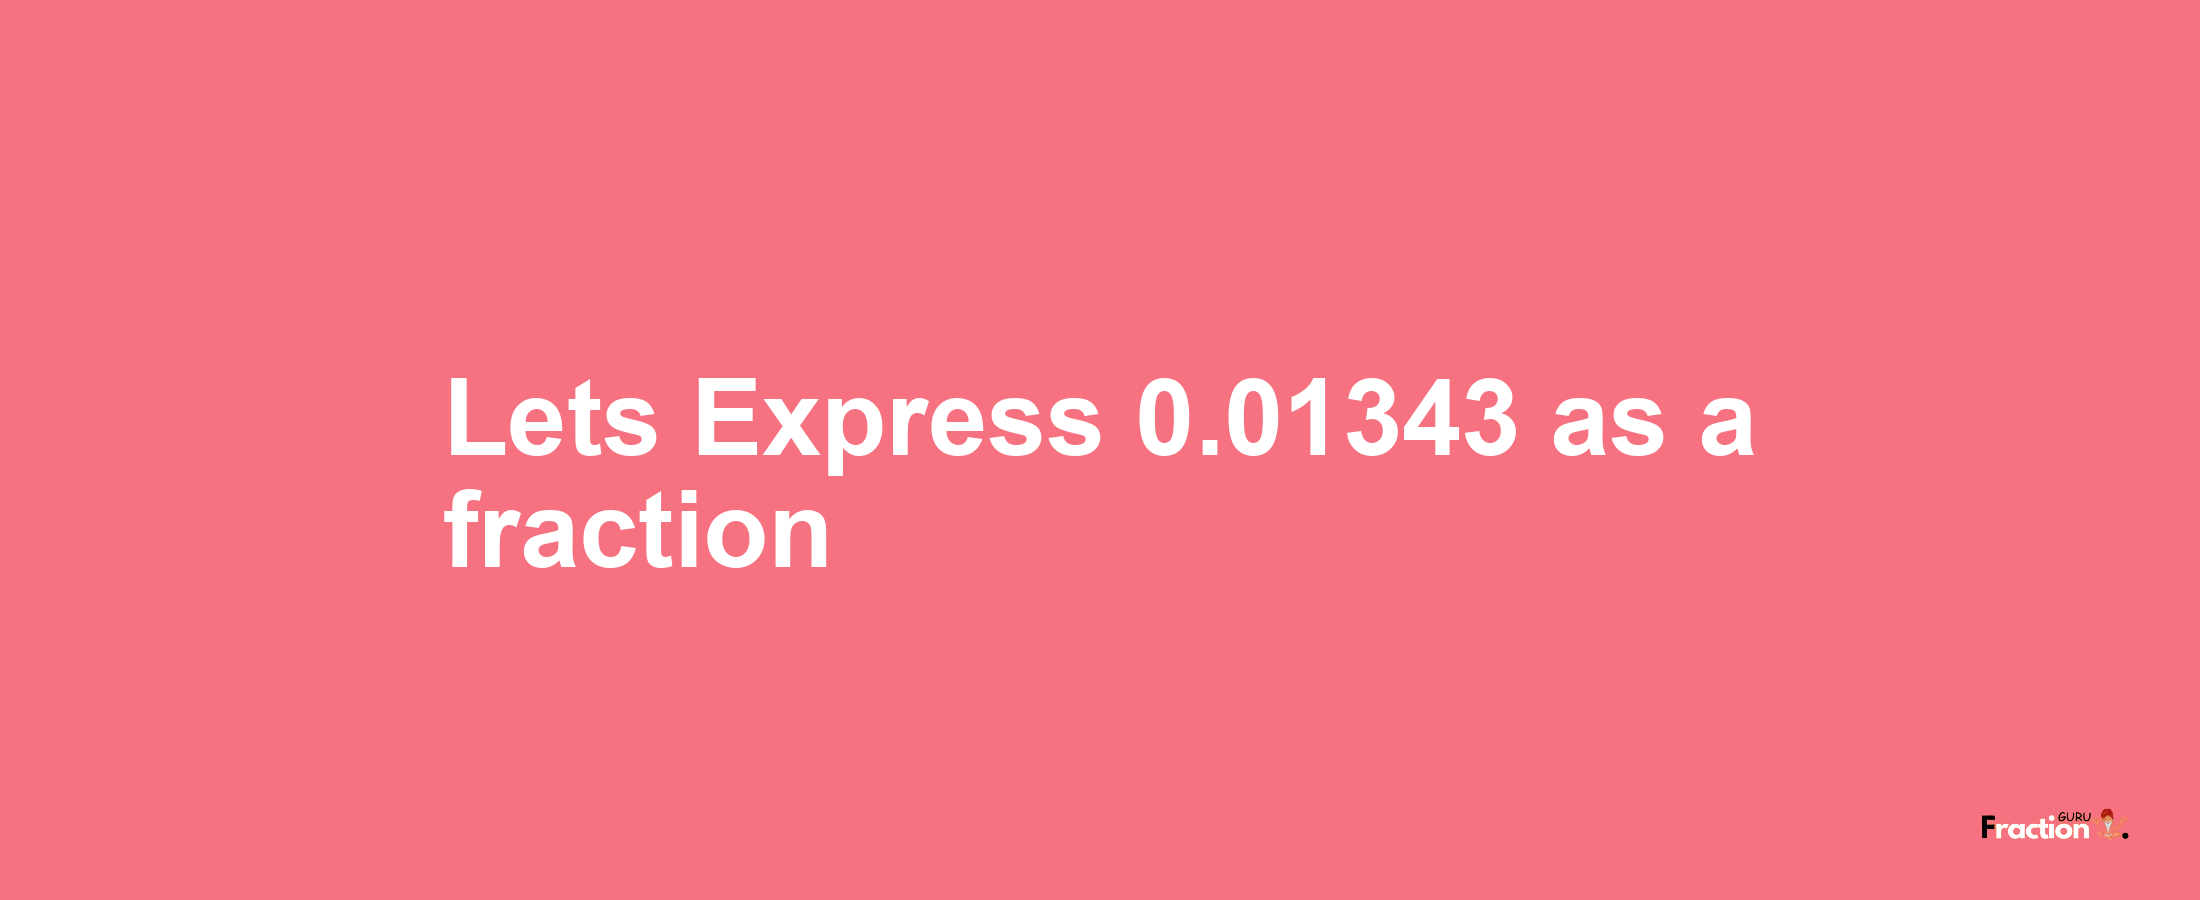 Lets Express 0.01343 as afraction